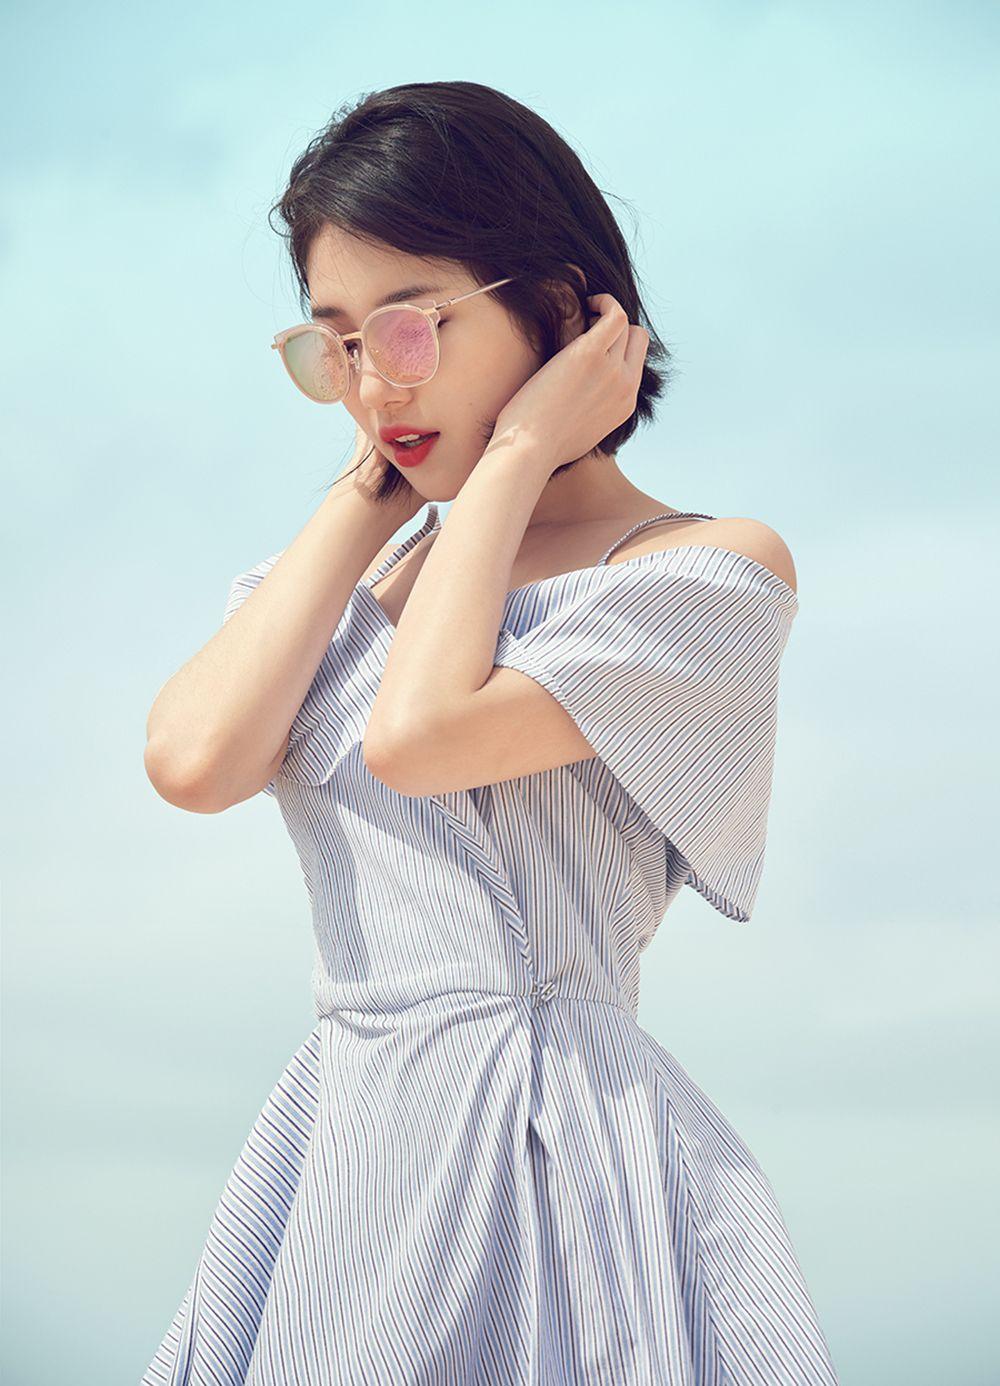 Bae Suzy Android IPhone Wallpaper KPOP Image Board